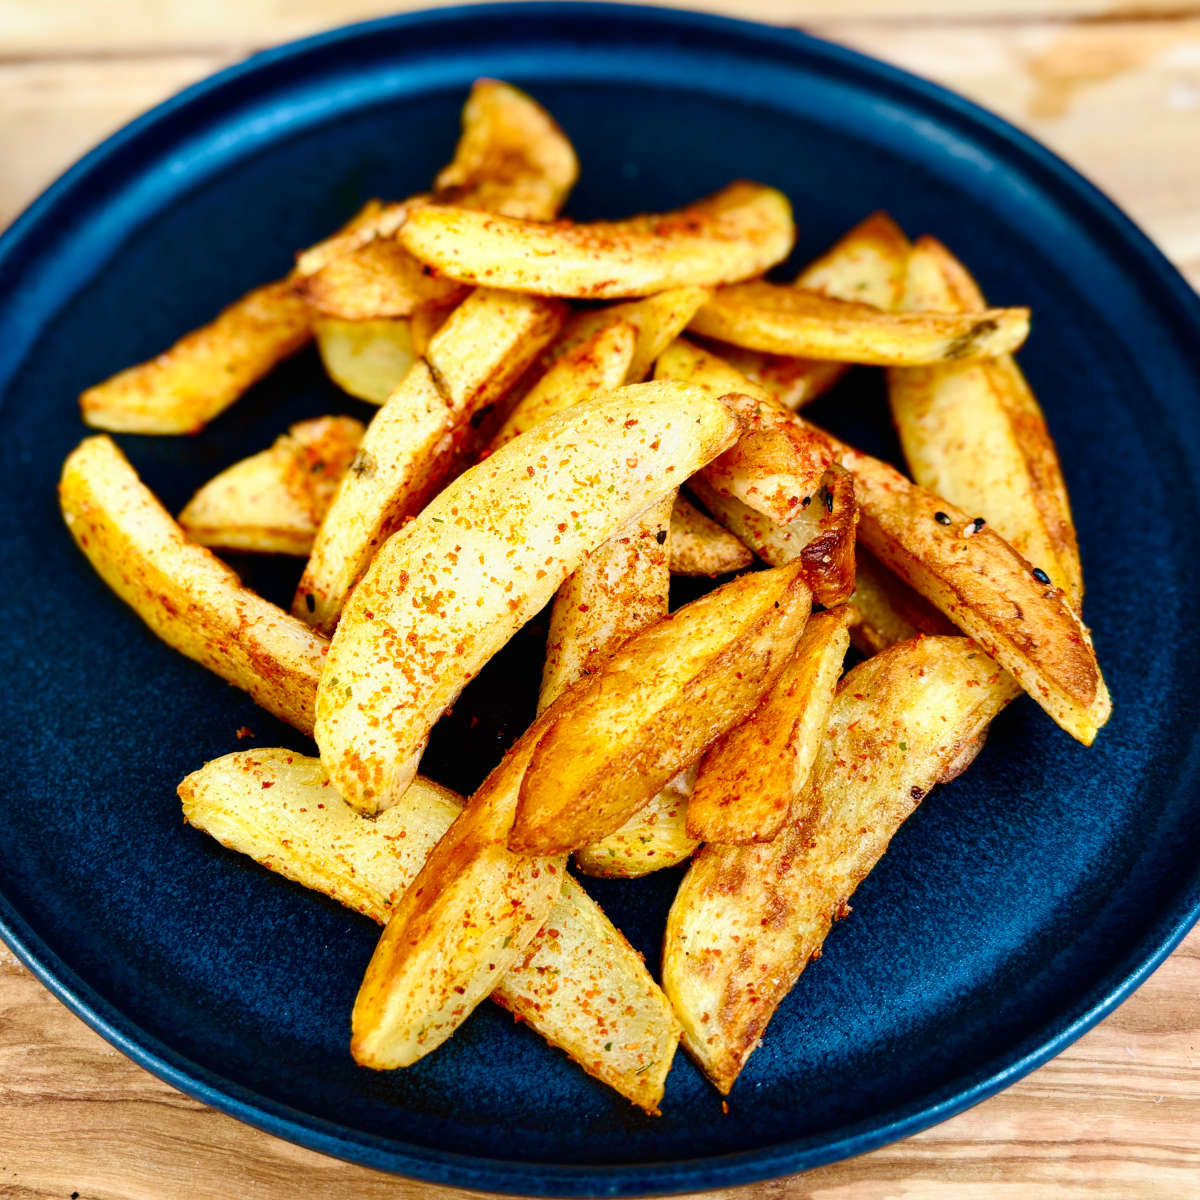 A plate of vegan Japanese togarashi fries. Golden, crunchy hand-cut potato fries made from scratch and seasoned with a cajun-like Japanese spice called shichimi togarashi.